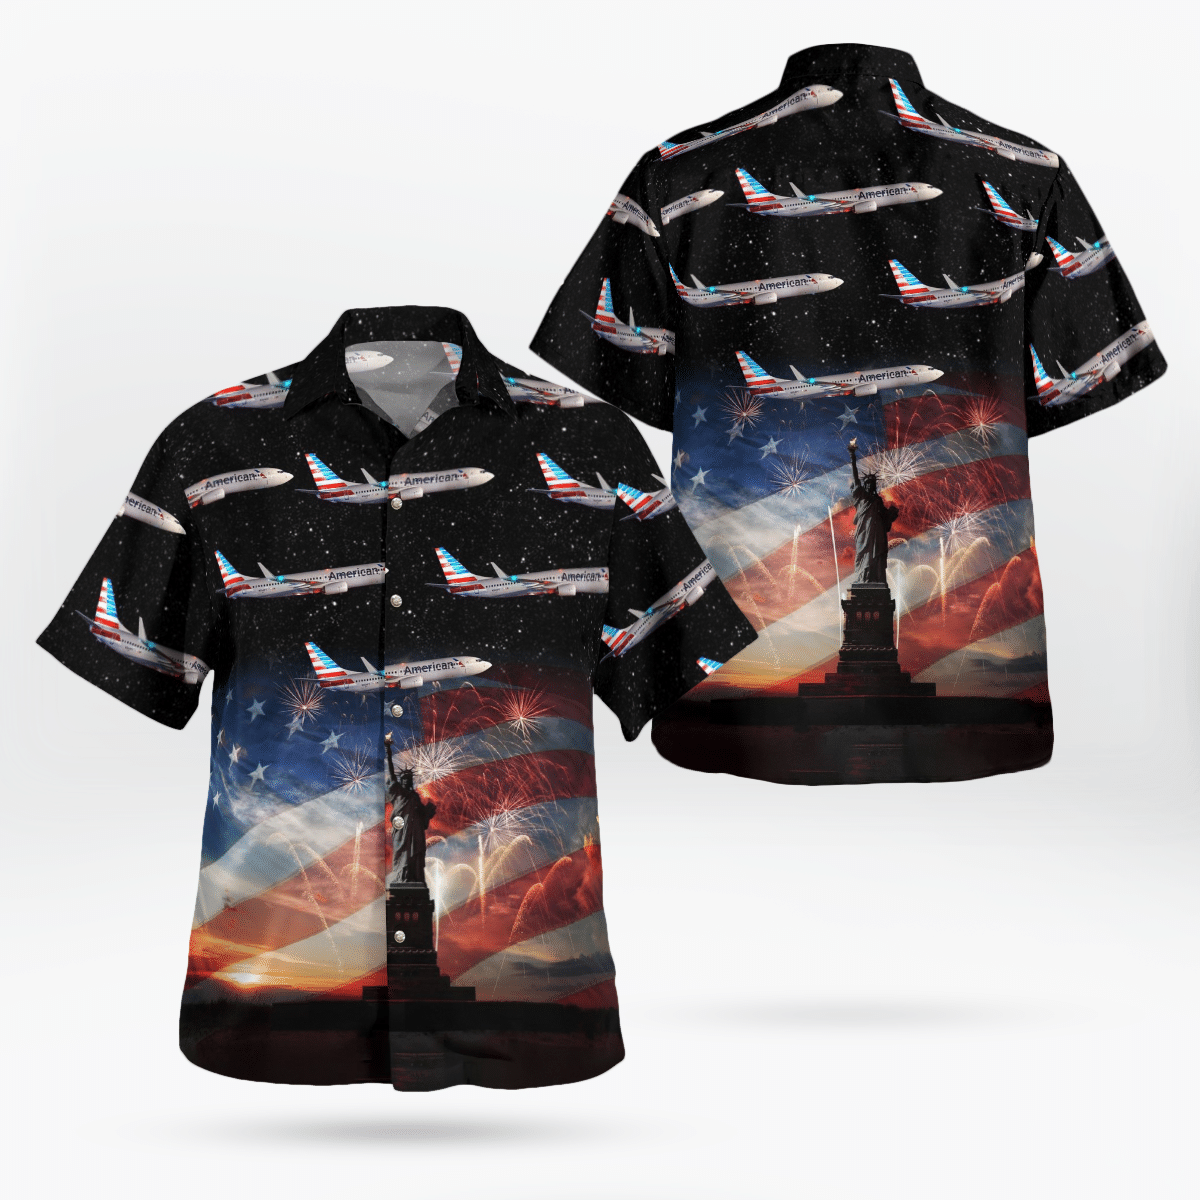 Consider getting these Hawaiian Shirt for your friends 289